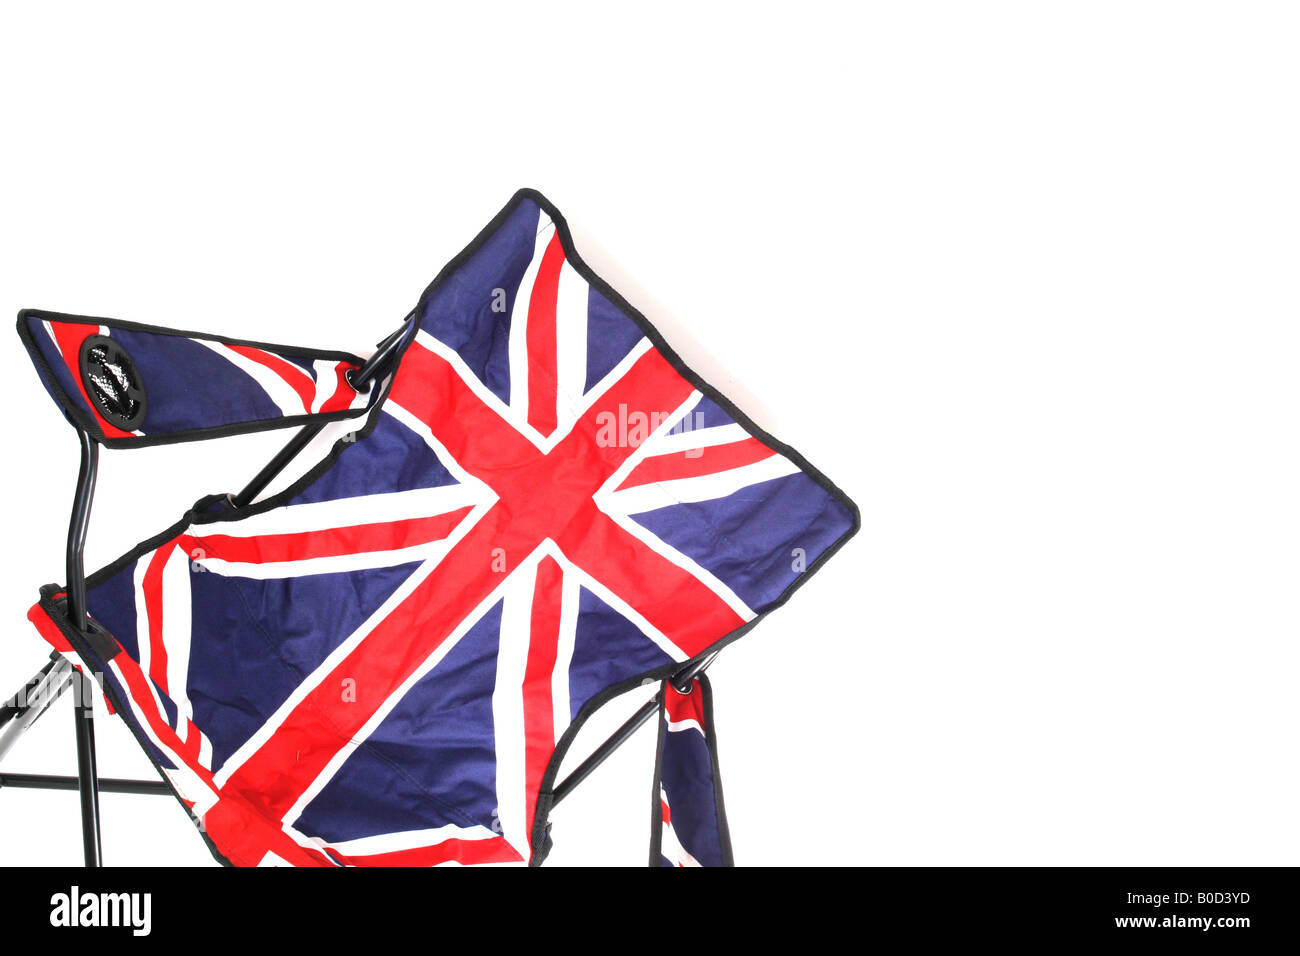 A British flag on a seat against an isolated background Stock Photo